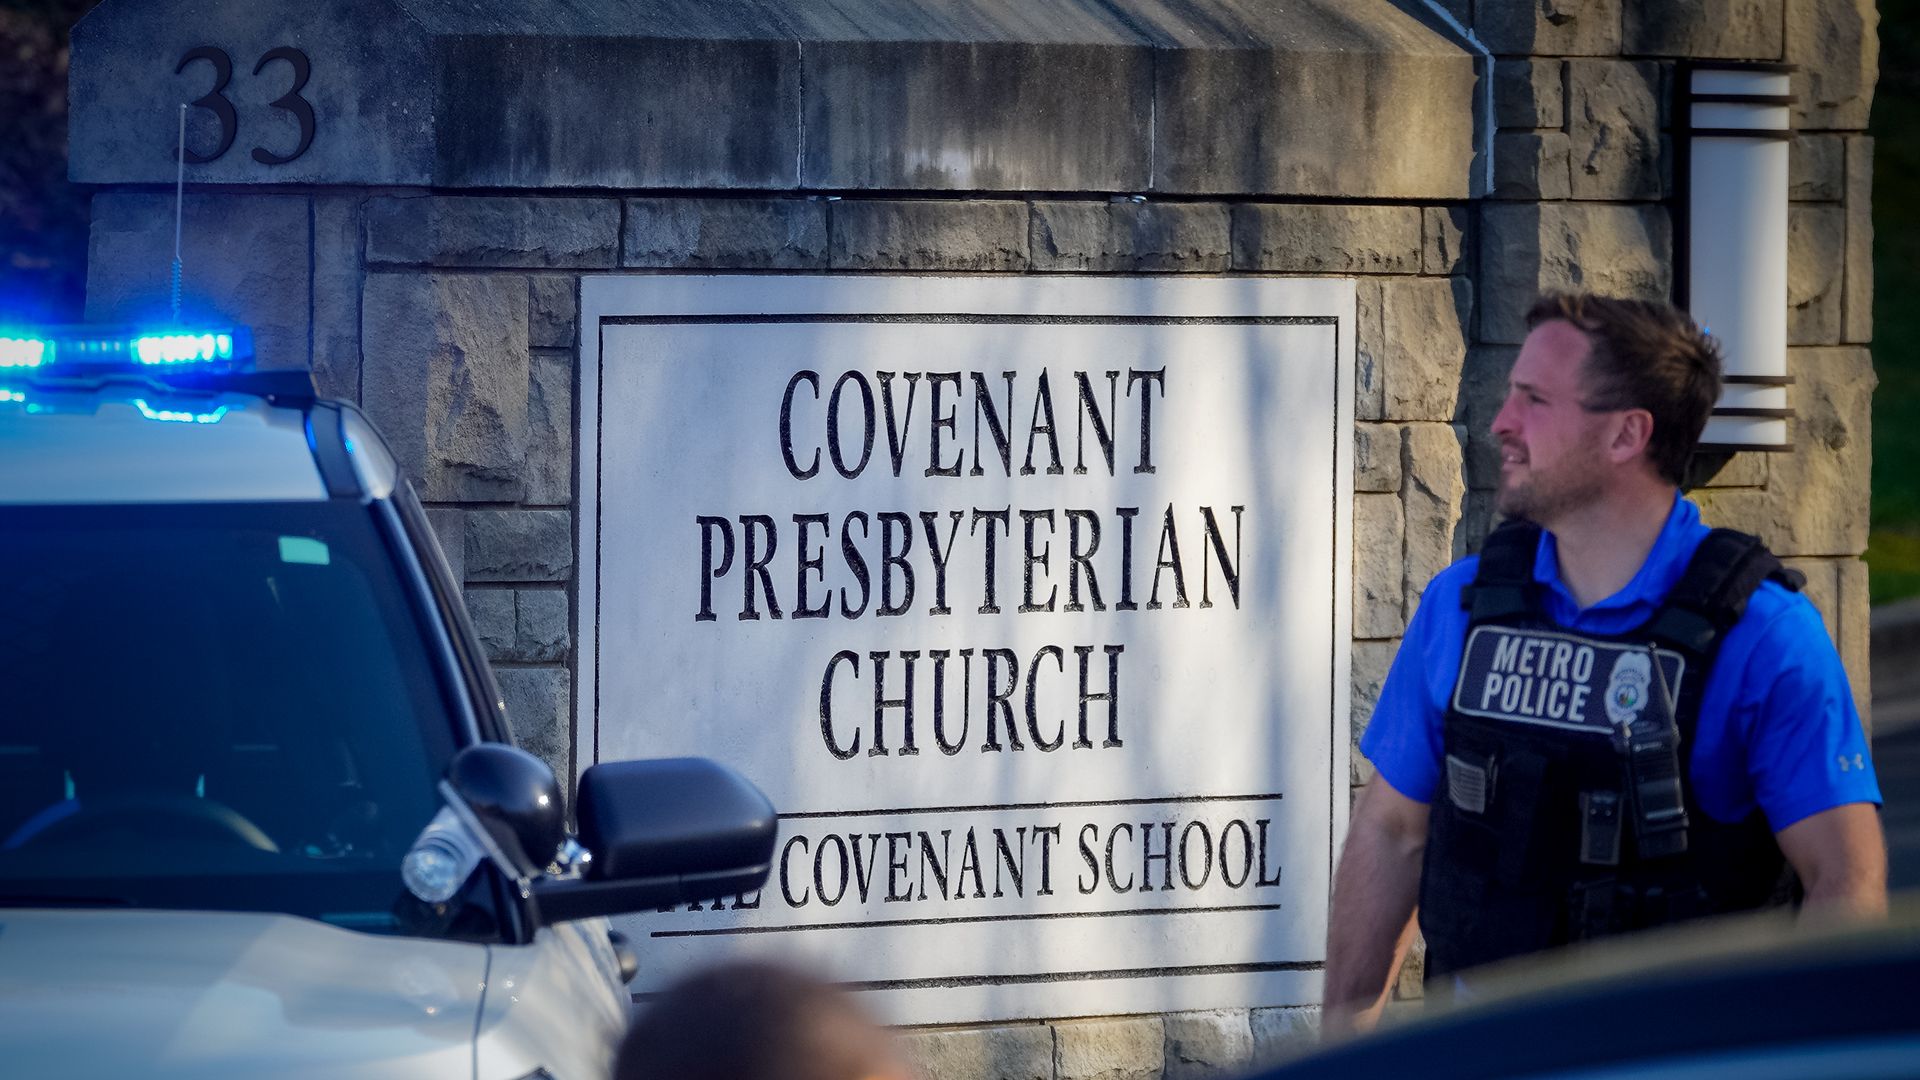 Nashville police block the entrance of the Covenant School, a Presbyterian school associated with a church after three children and three adults were gunned down